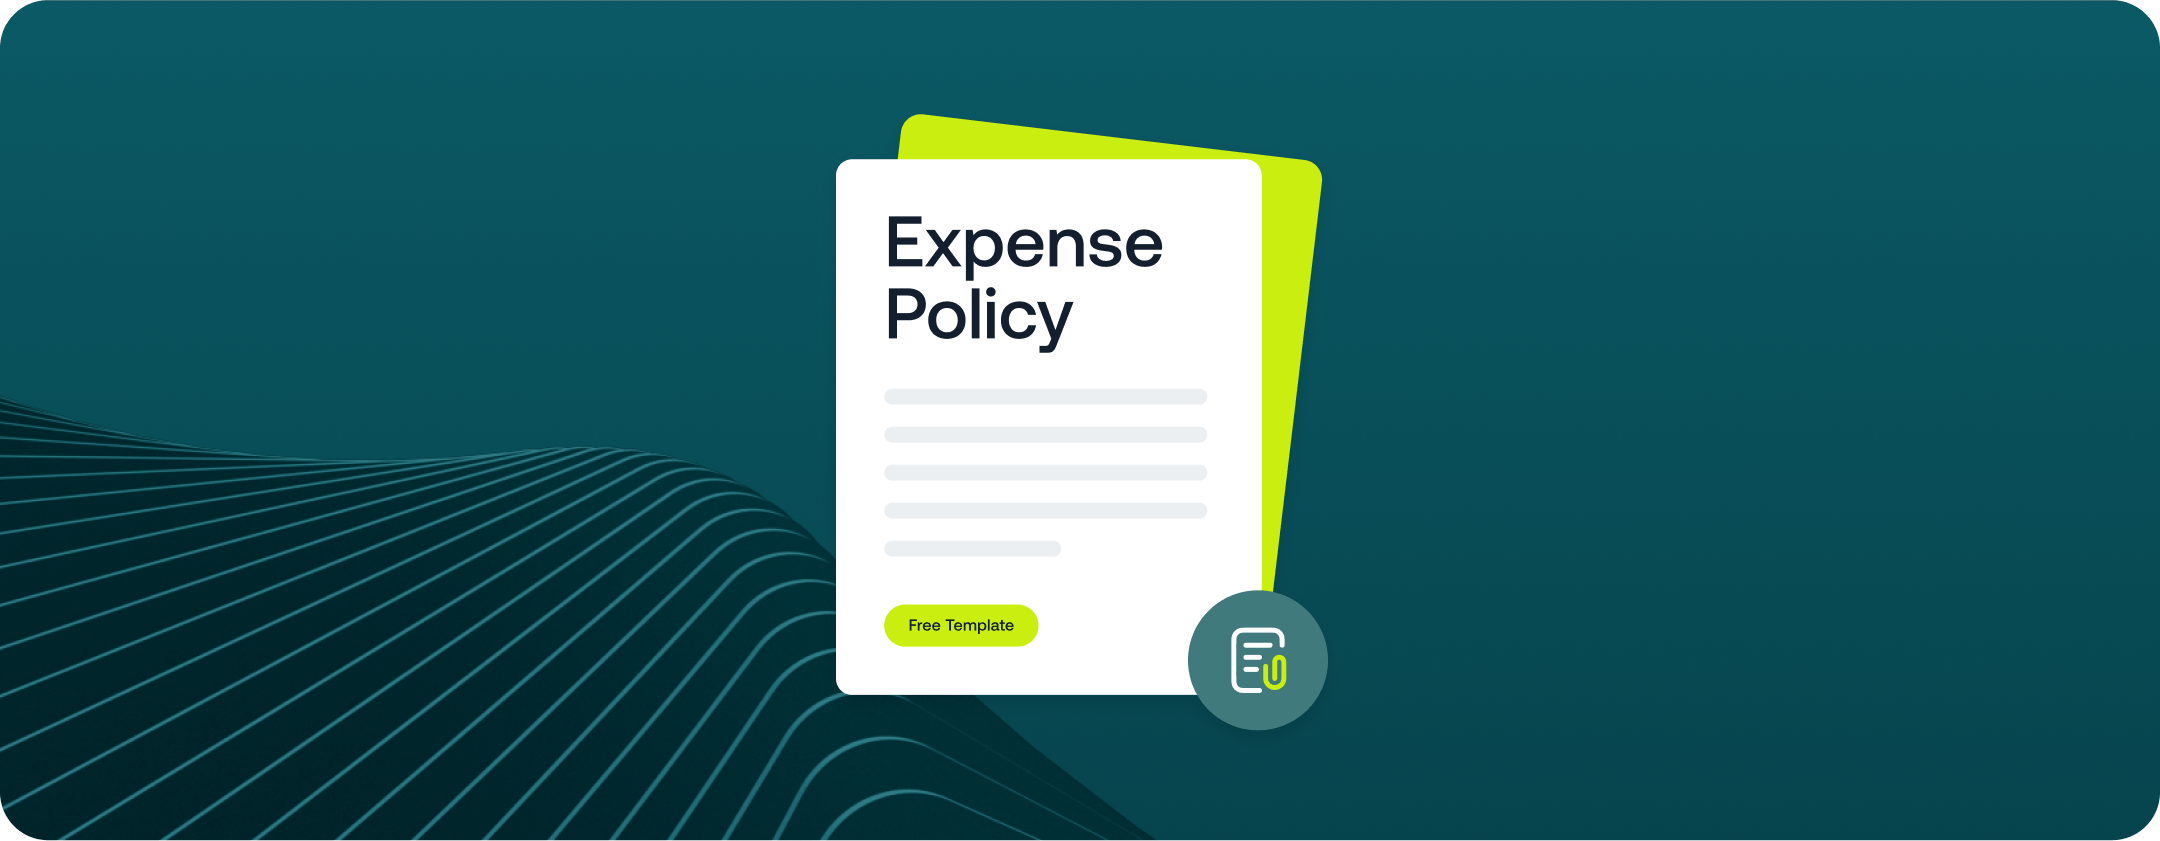 expense policy